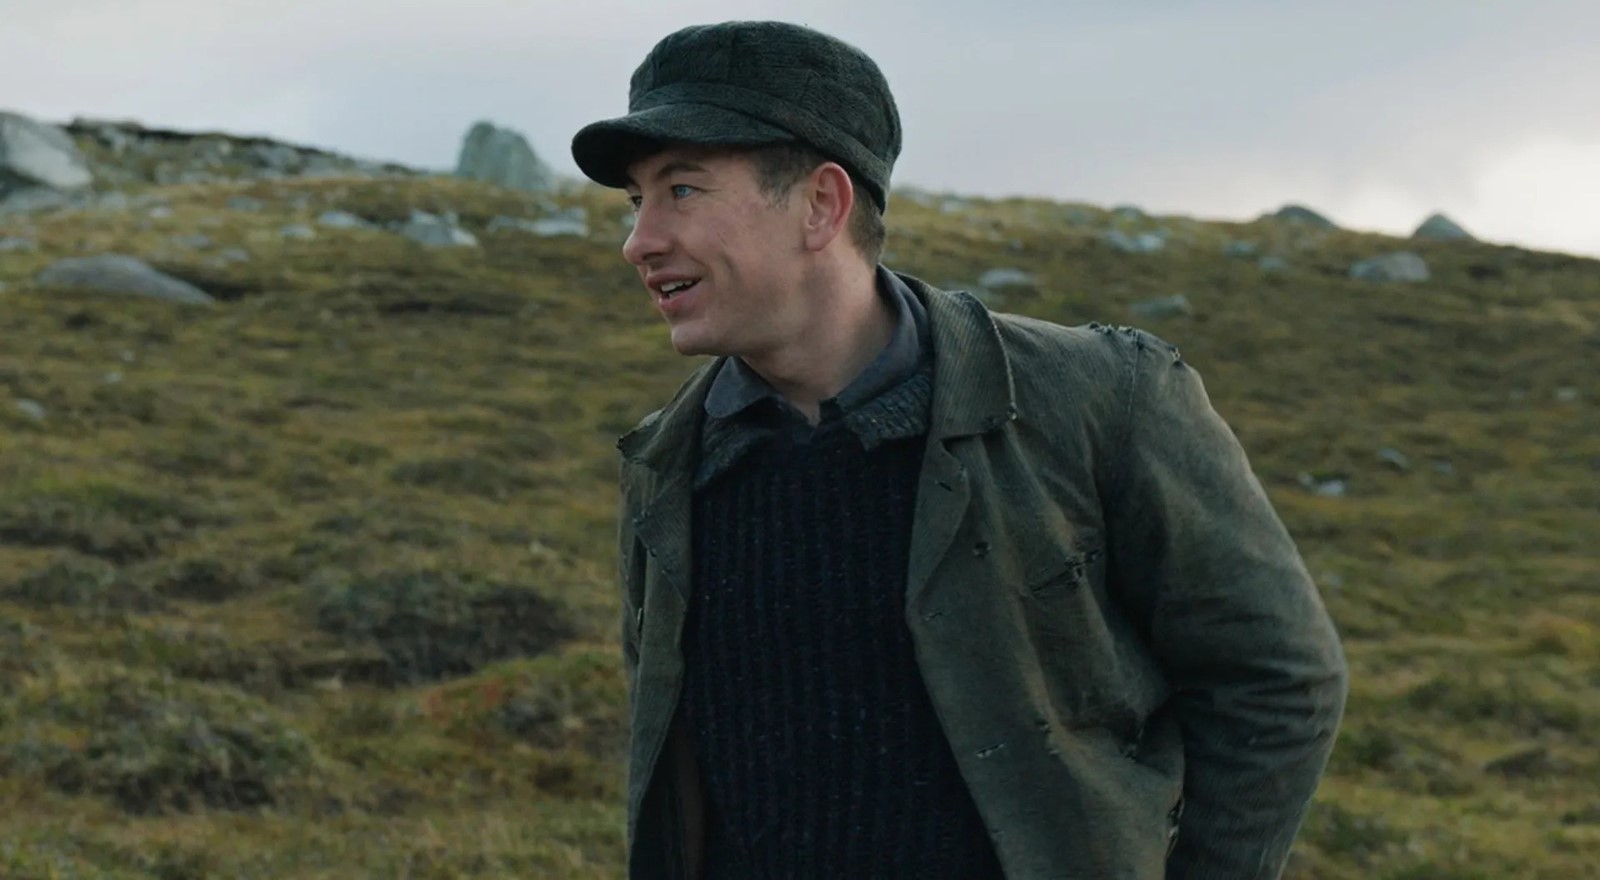 #The-Banshees-of-Inisherin-Darsteller Barry Keoghan spielt Billy the Kid